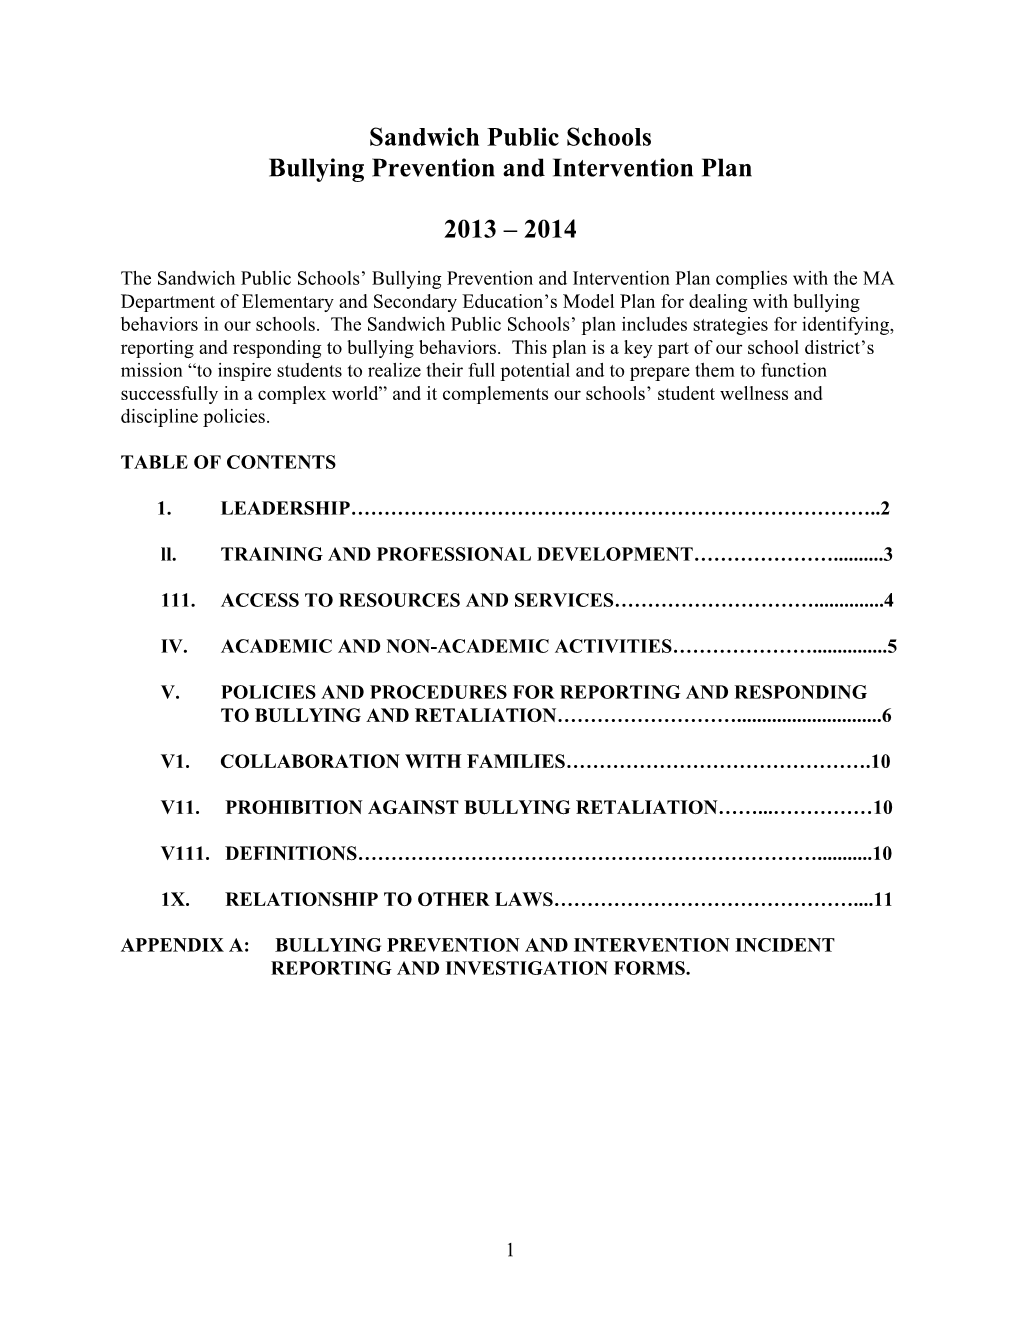 Sandwich Public Schools Bullying Prevention and Intervention Plan